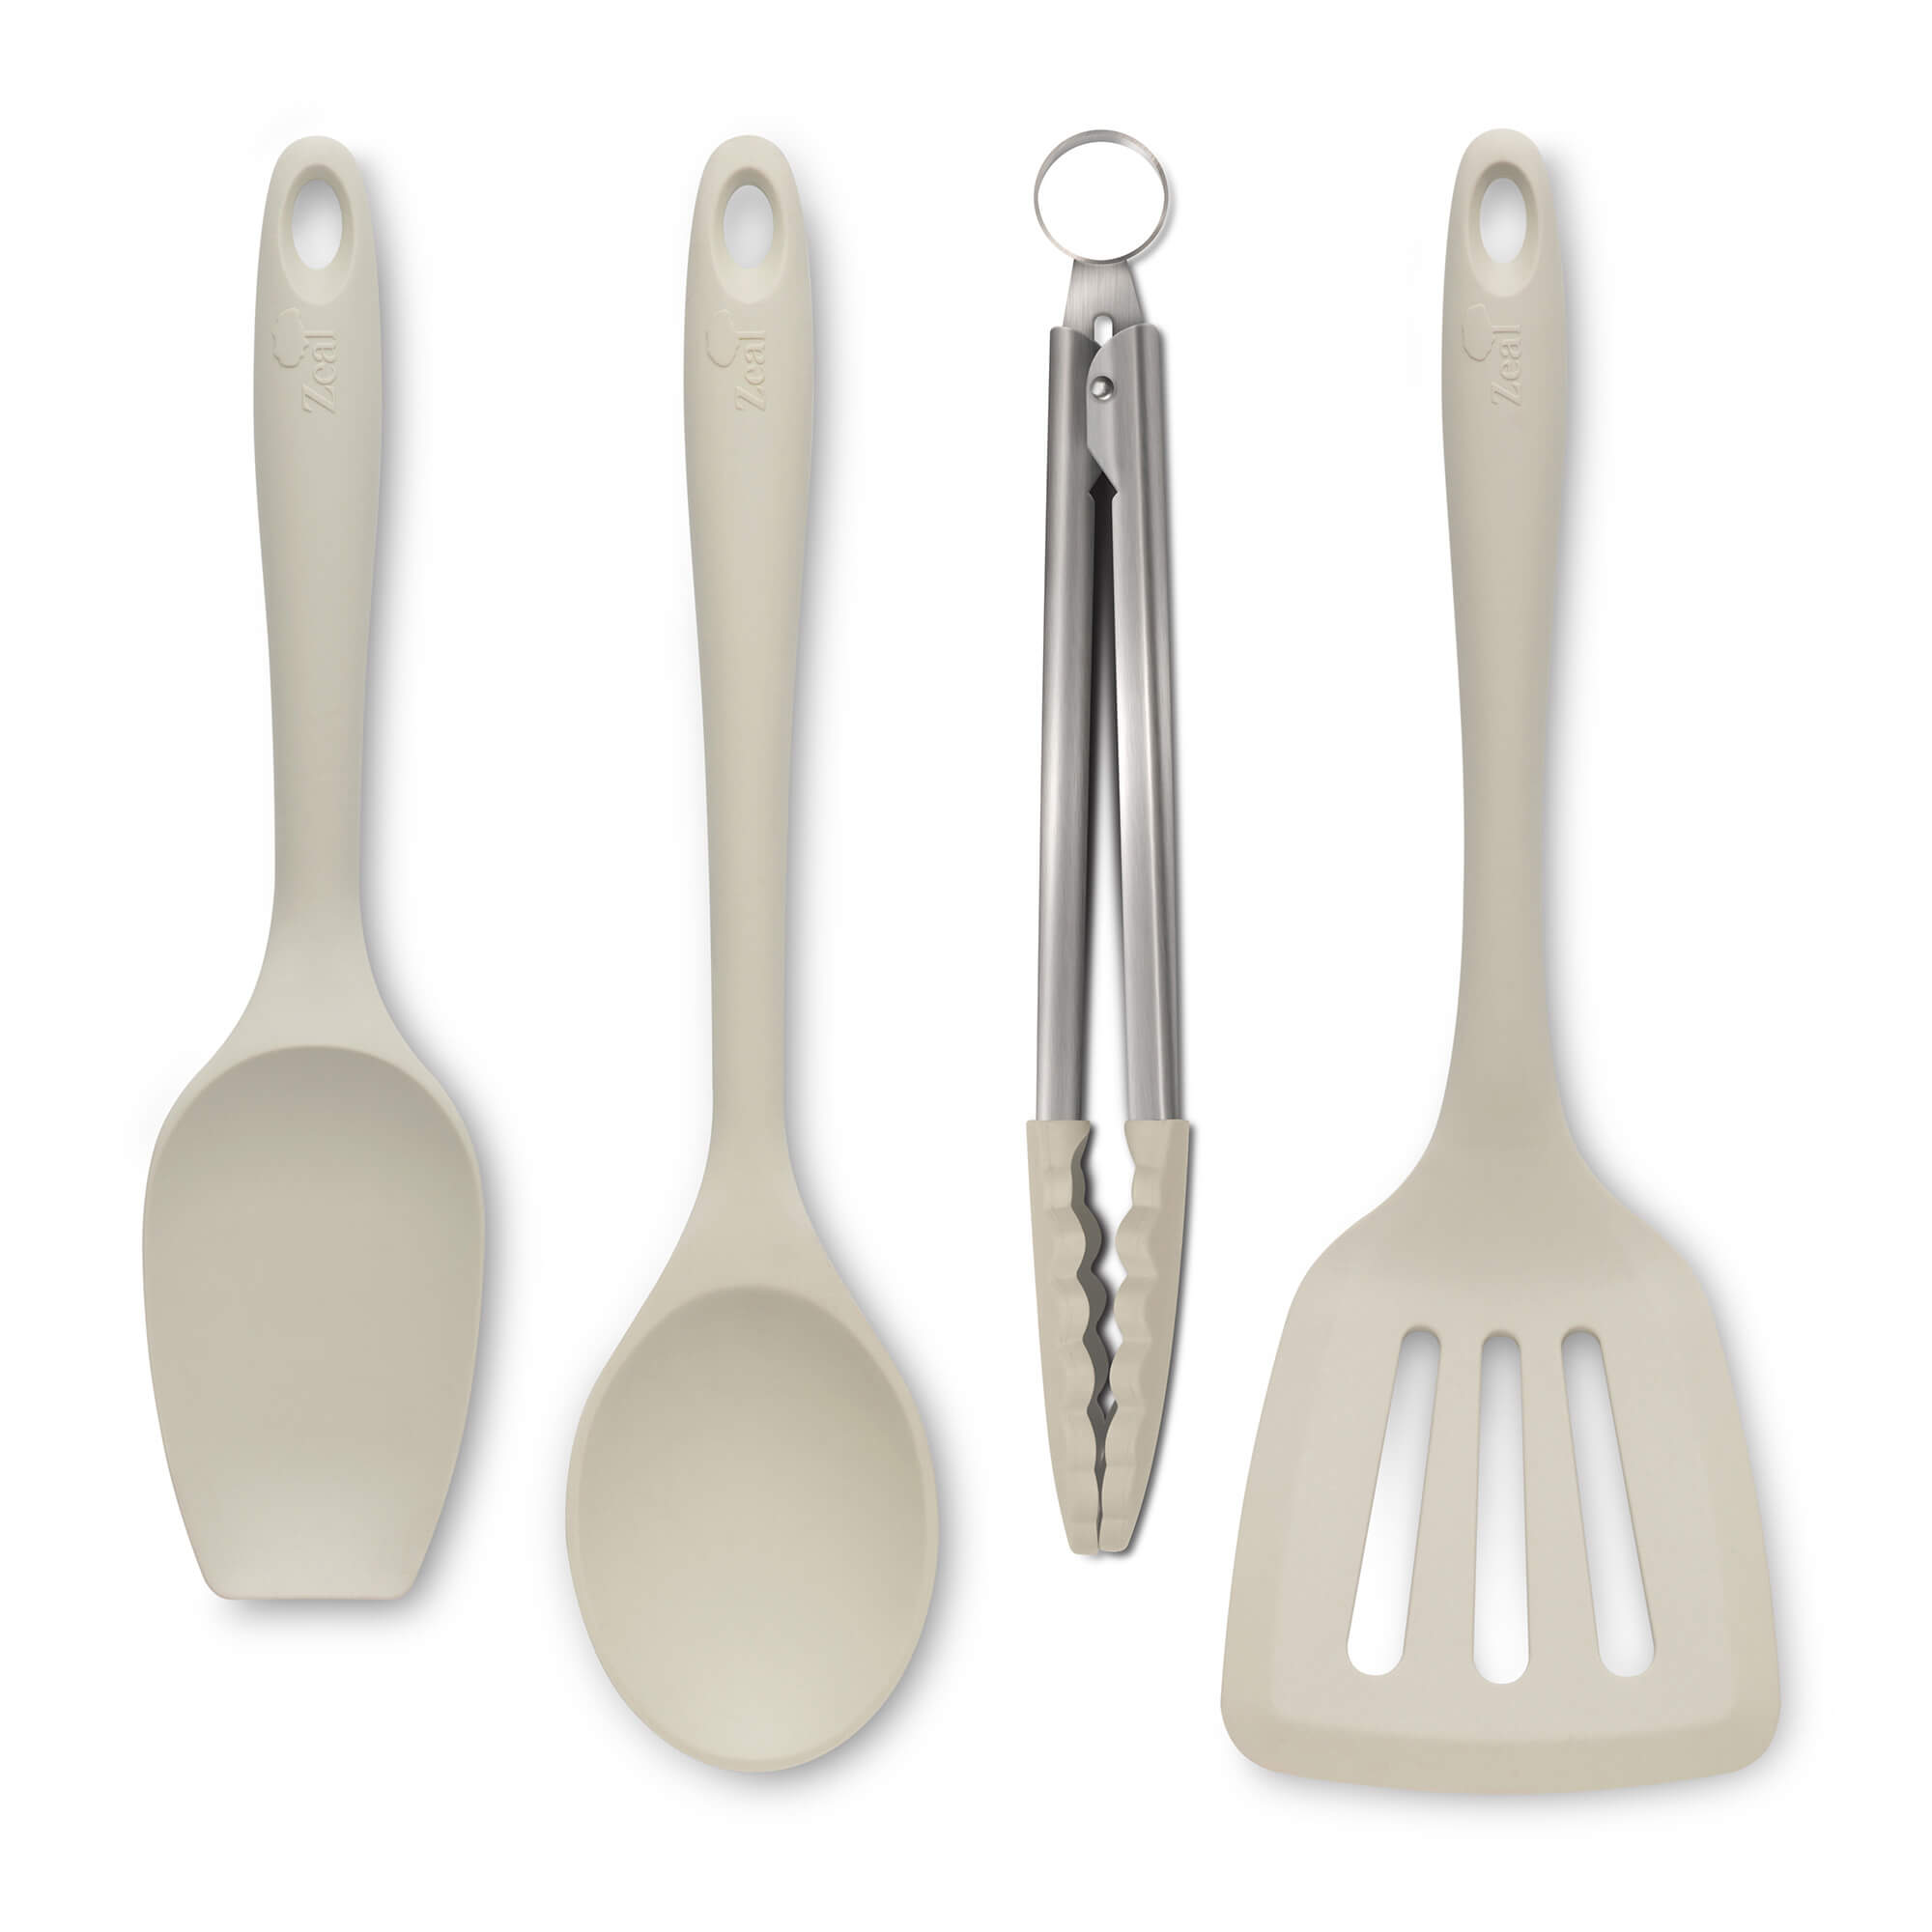 Zeal Kitchen Tongs, Slotted Turner, Spoon & Spatula Spoon Set in Cream